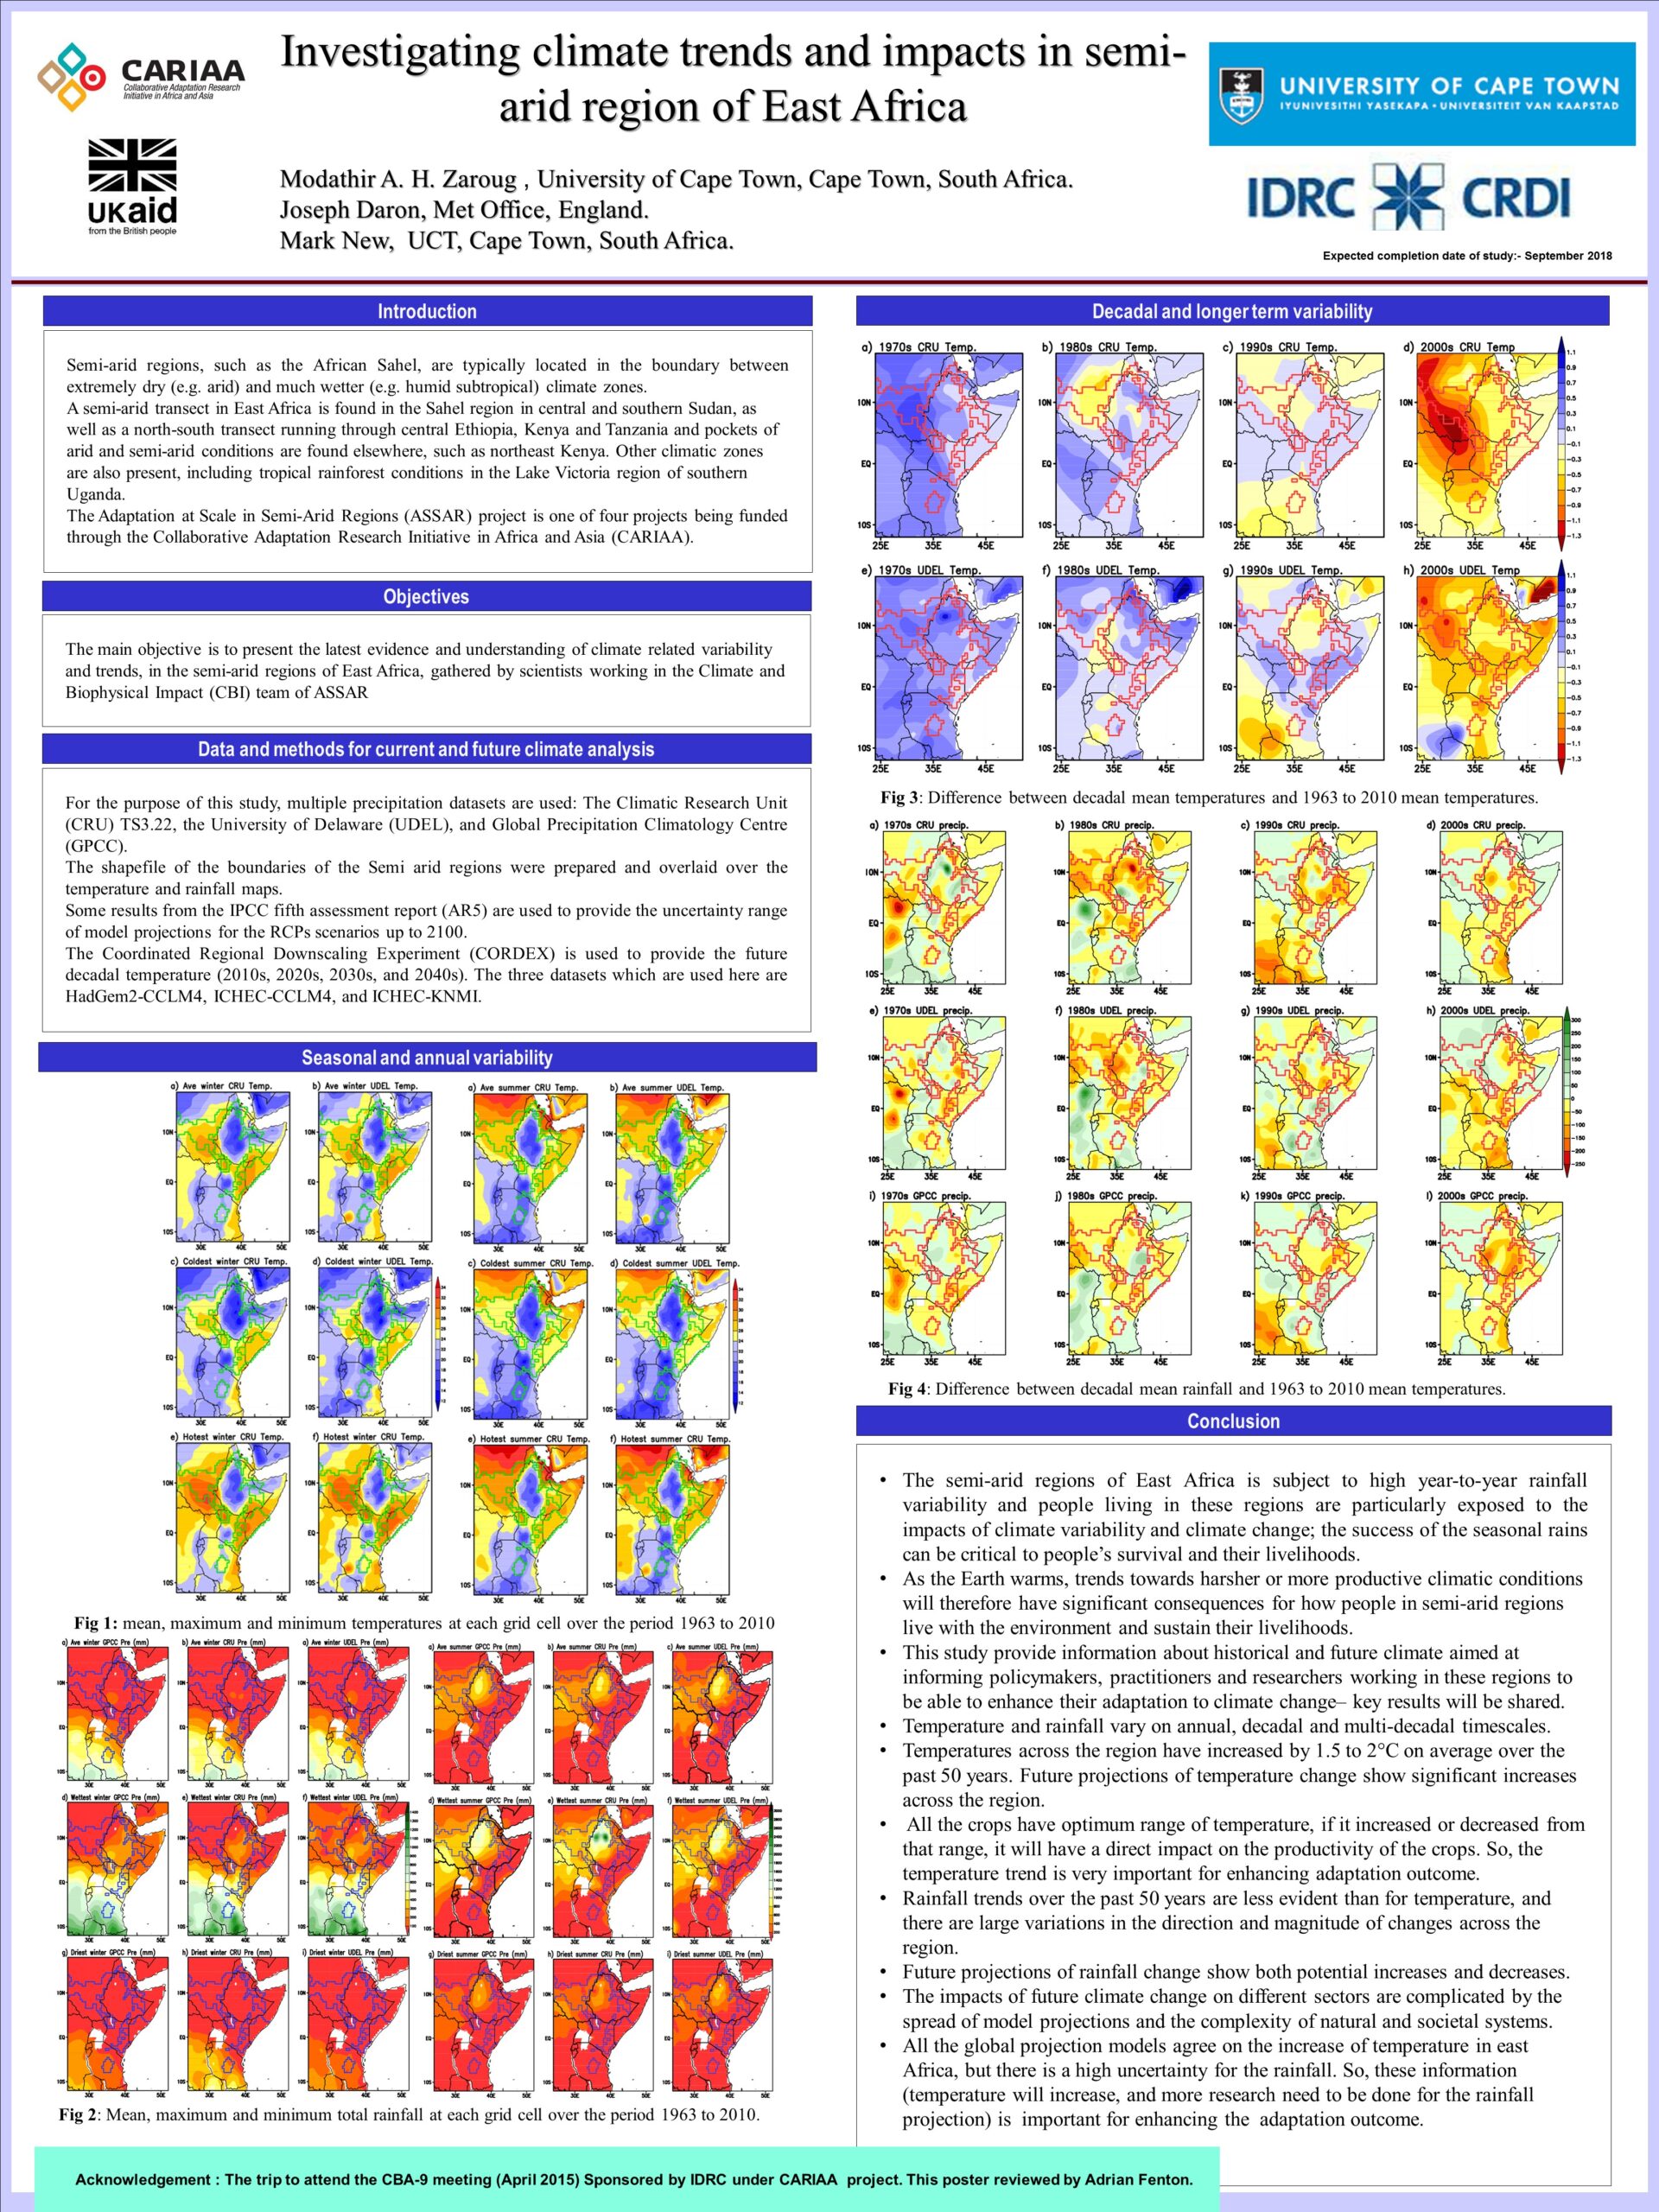 Image of Investigating Climate trends and impacts in semi-arid regions of East Africa Poster